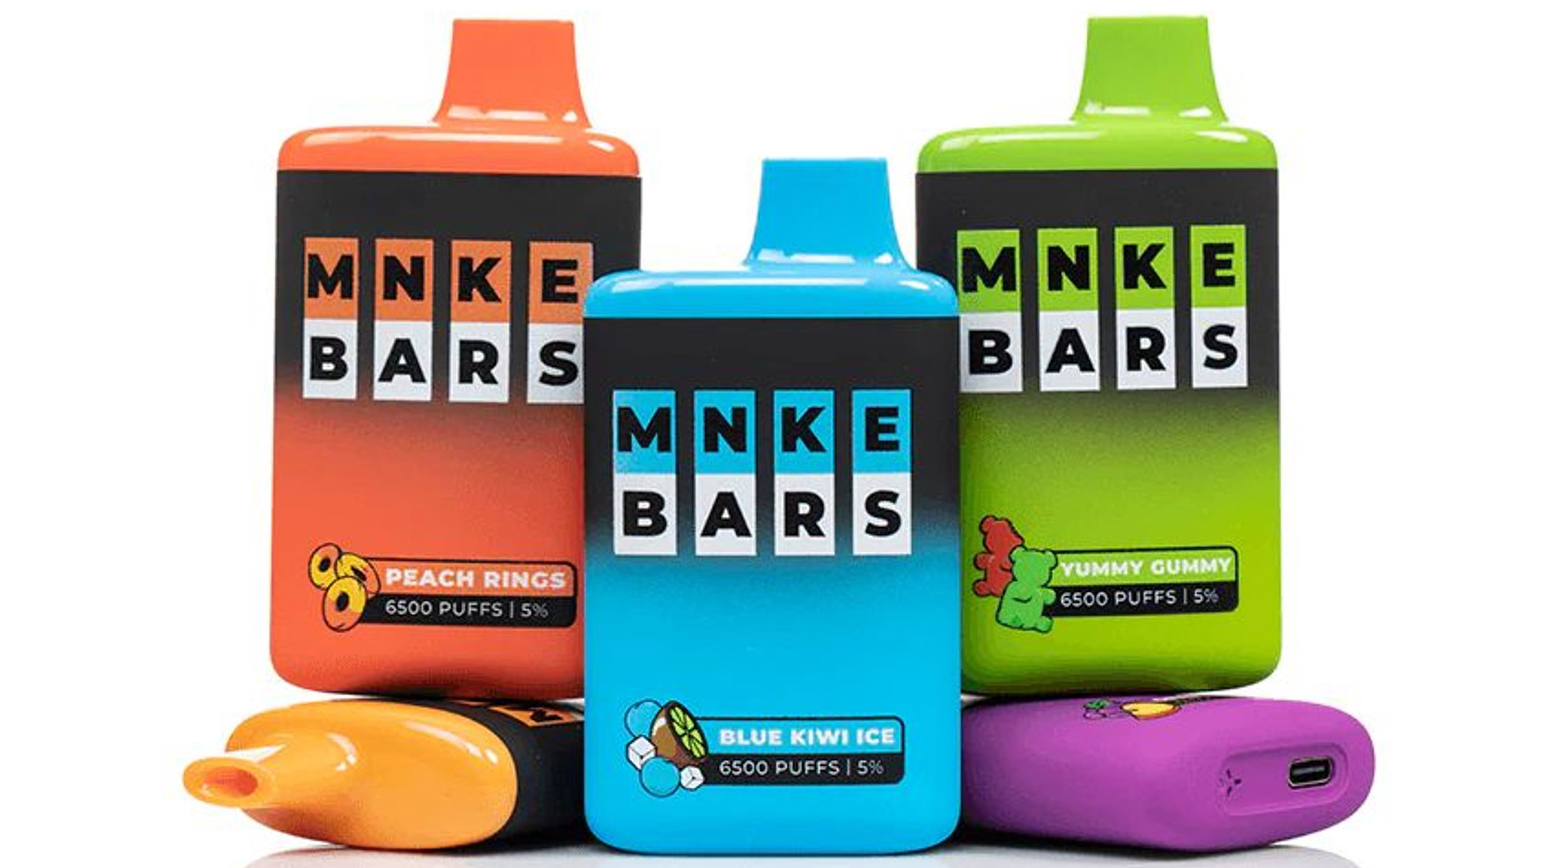 MNKE Bars Disposable Review